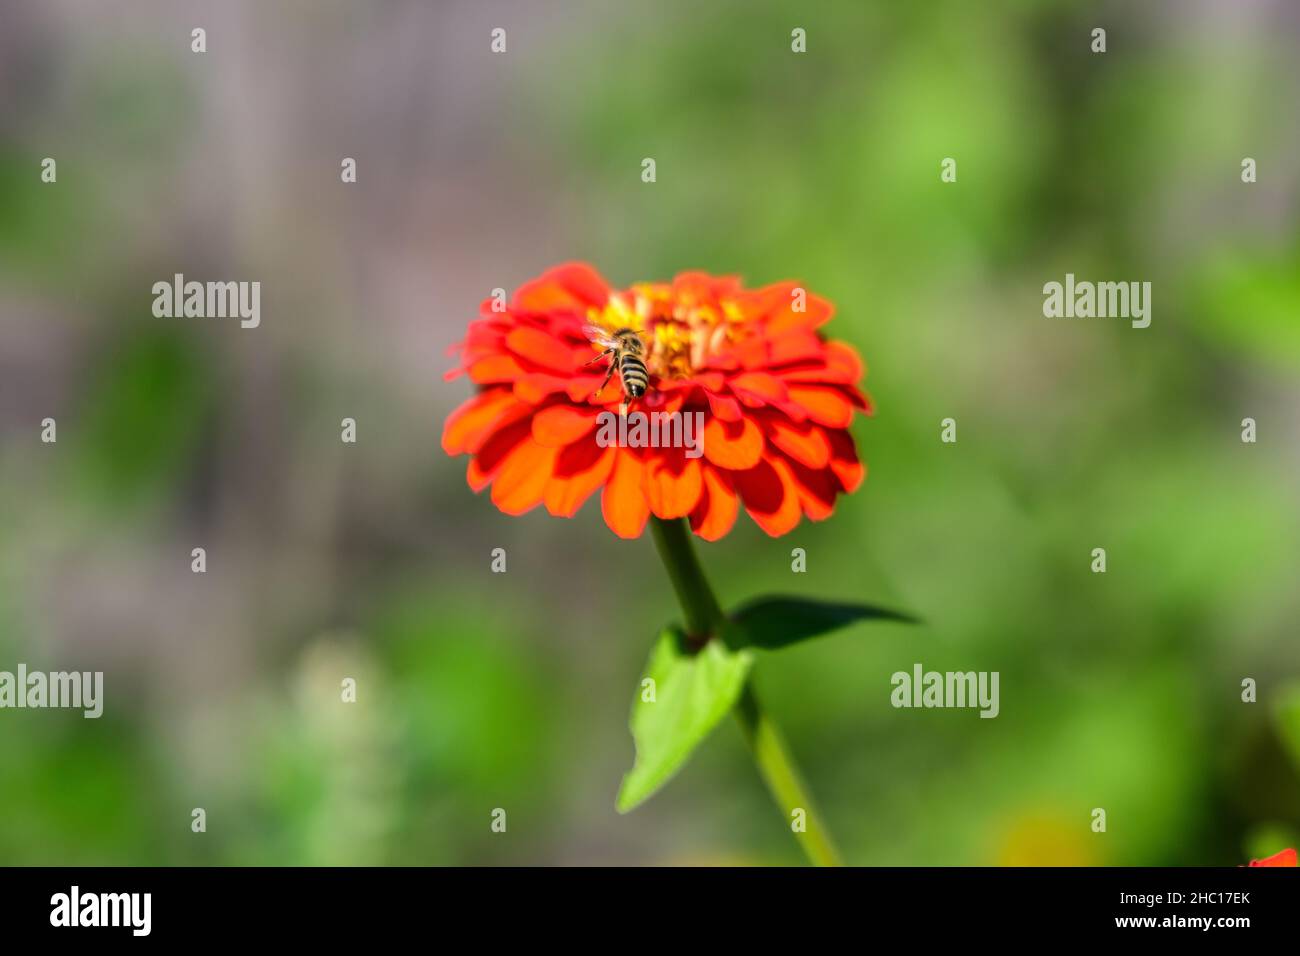 Close up of one beautiful large red zinnia flower in full bloom on blurred green background, photographed with soft focus in a garden in a sunny summe Stock Photo